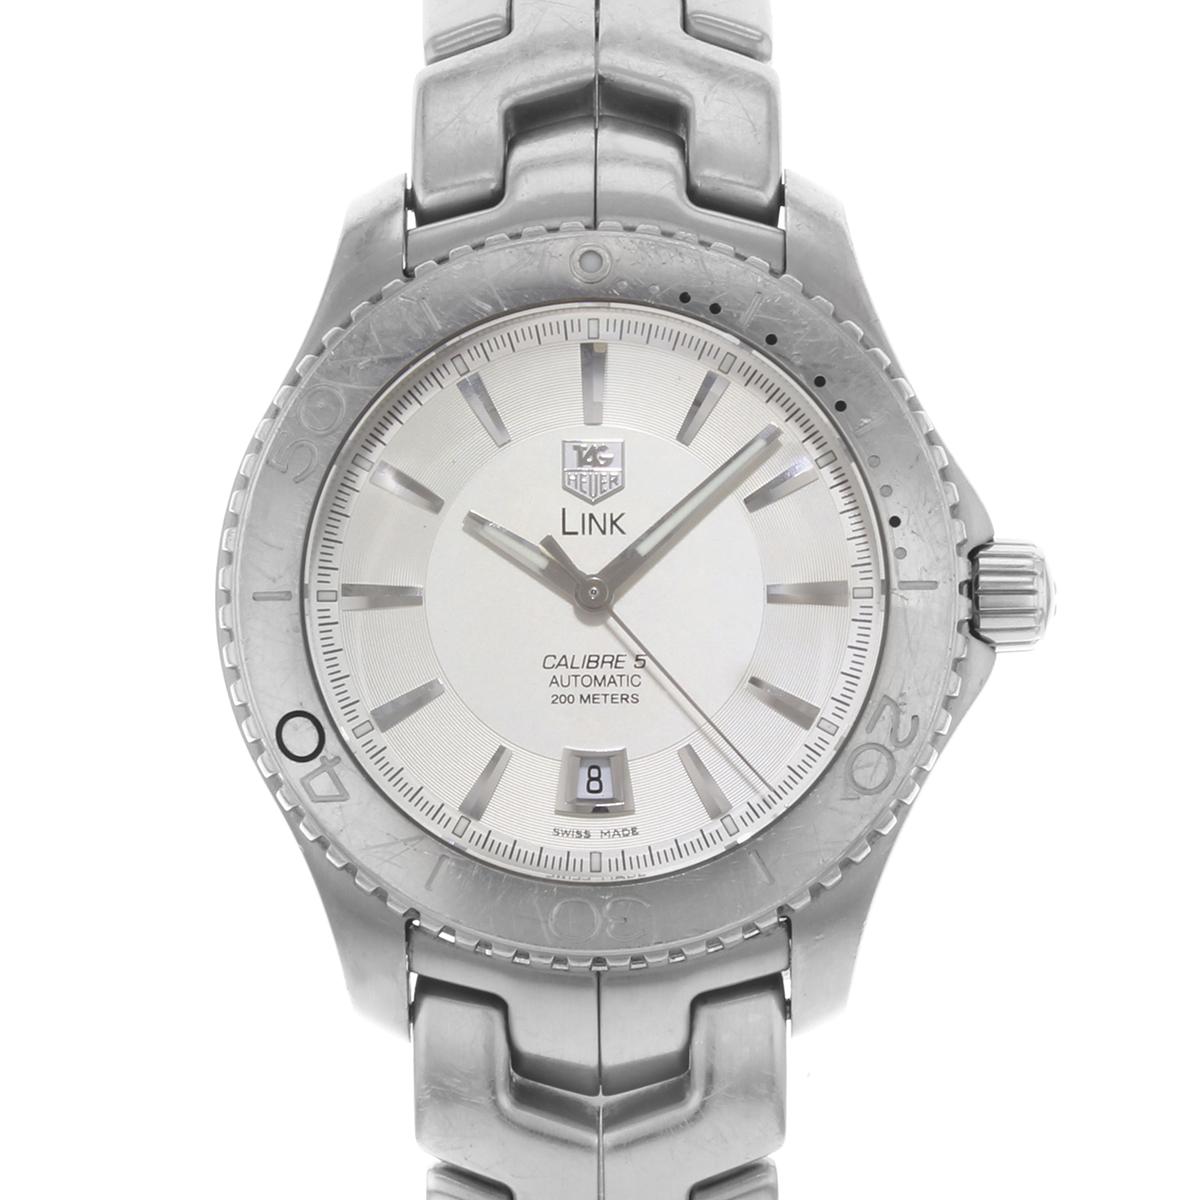 This pre-owned TAG Heuer Link WJ201B.BA0591 is a beautiful men's timepiece that is powered by an automatic movement which is cased in a stainless steel case. It has a round shape face, date dial and has hand sticks style markers. It is completed